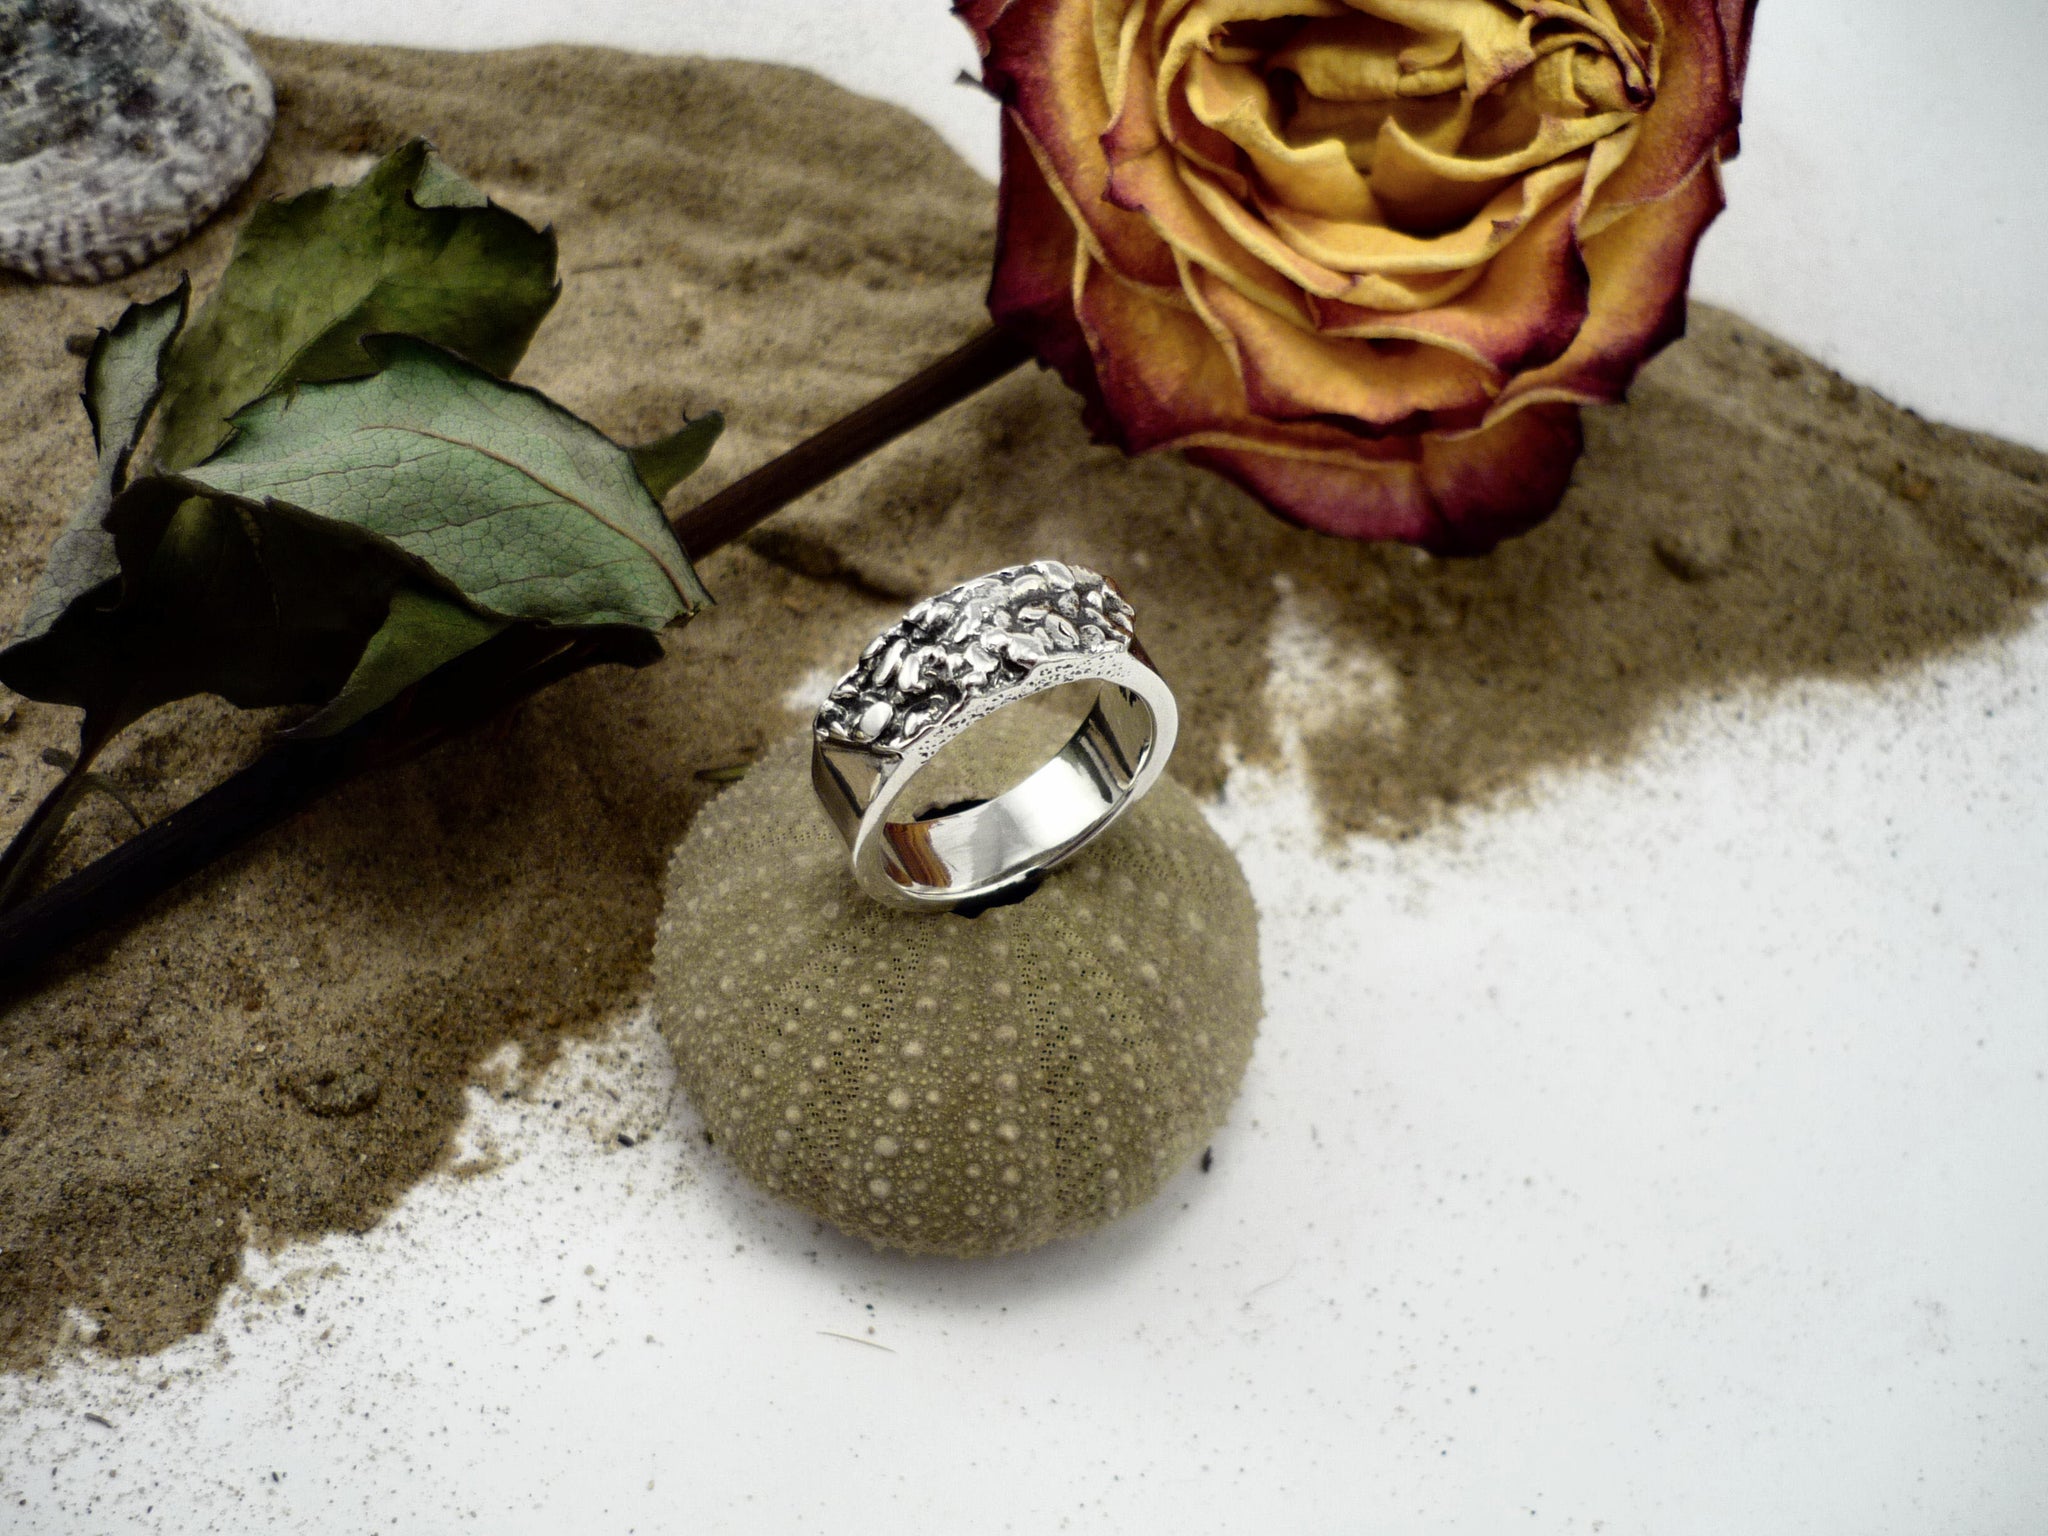 APERITIF, sesame seeds textured sterling silver ring